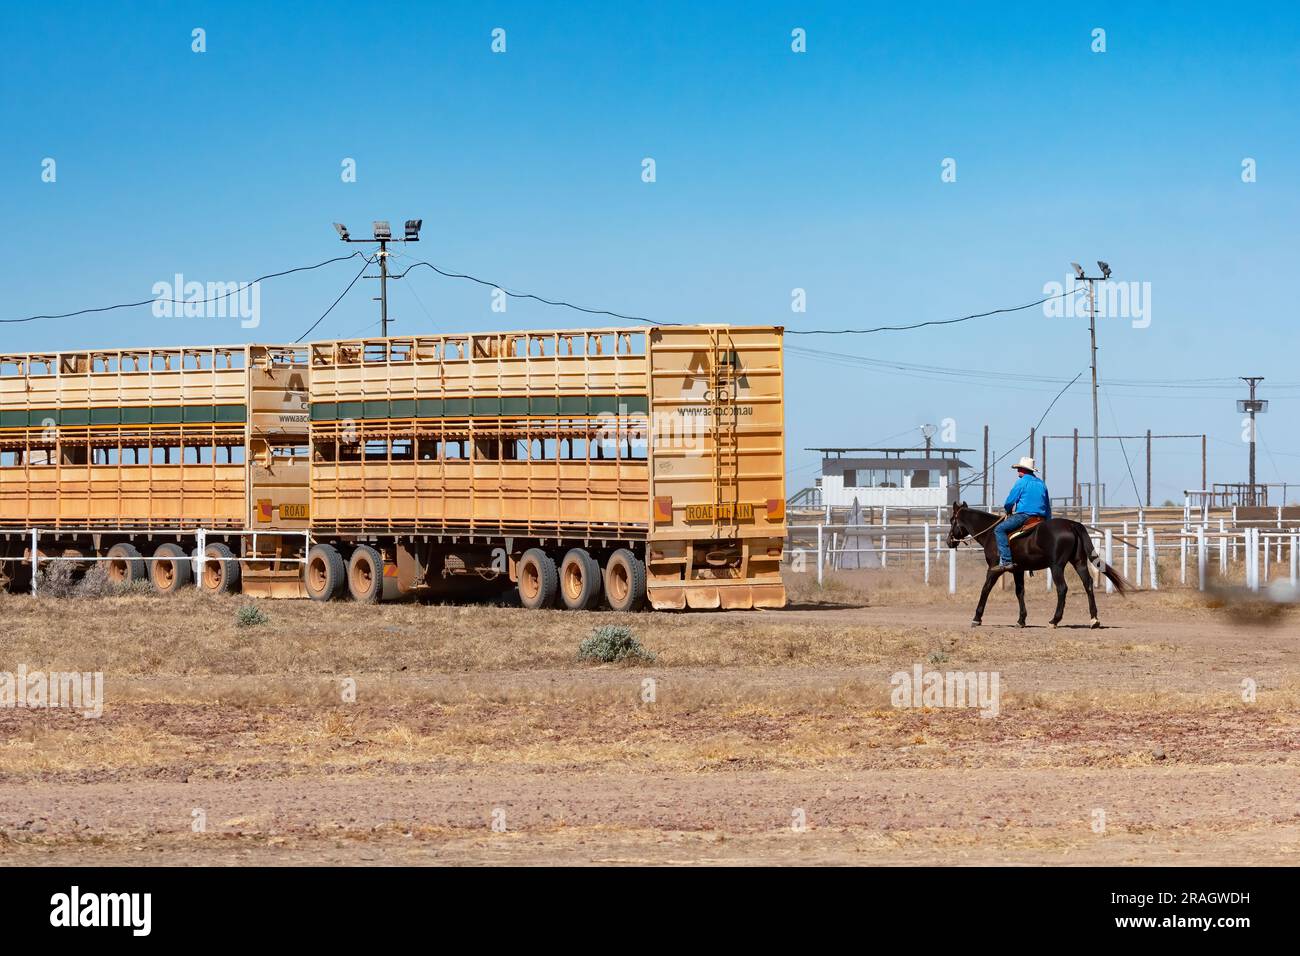 Stockman rides next to a cattle truck, Brunette Downs Cattle Station, Barkly Tablelands, Northern Territory, NT, Australia Stock Photo